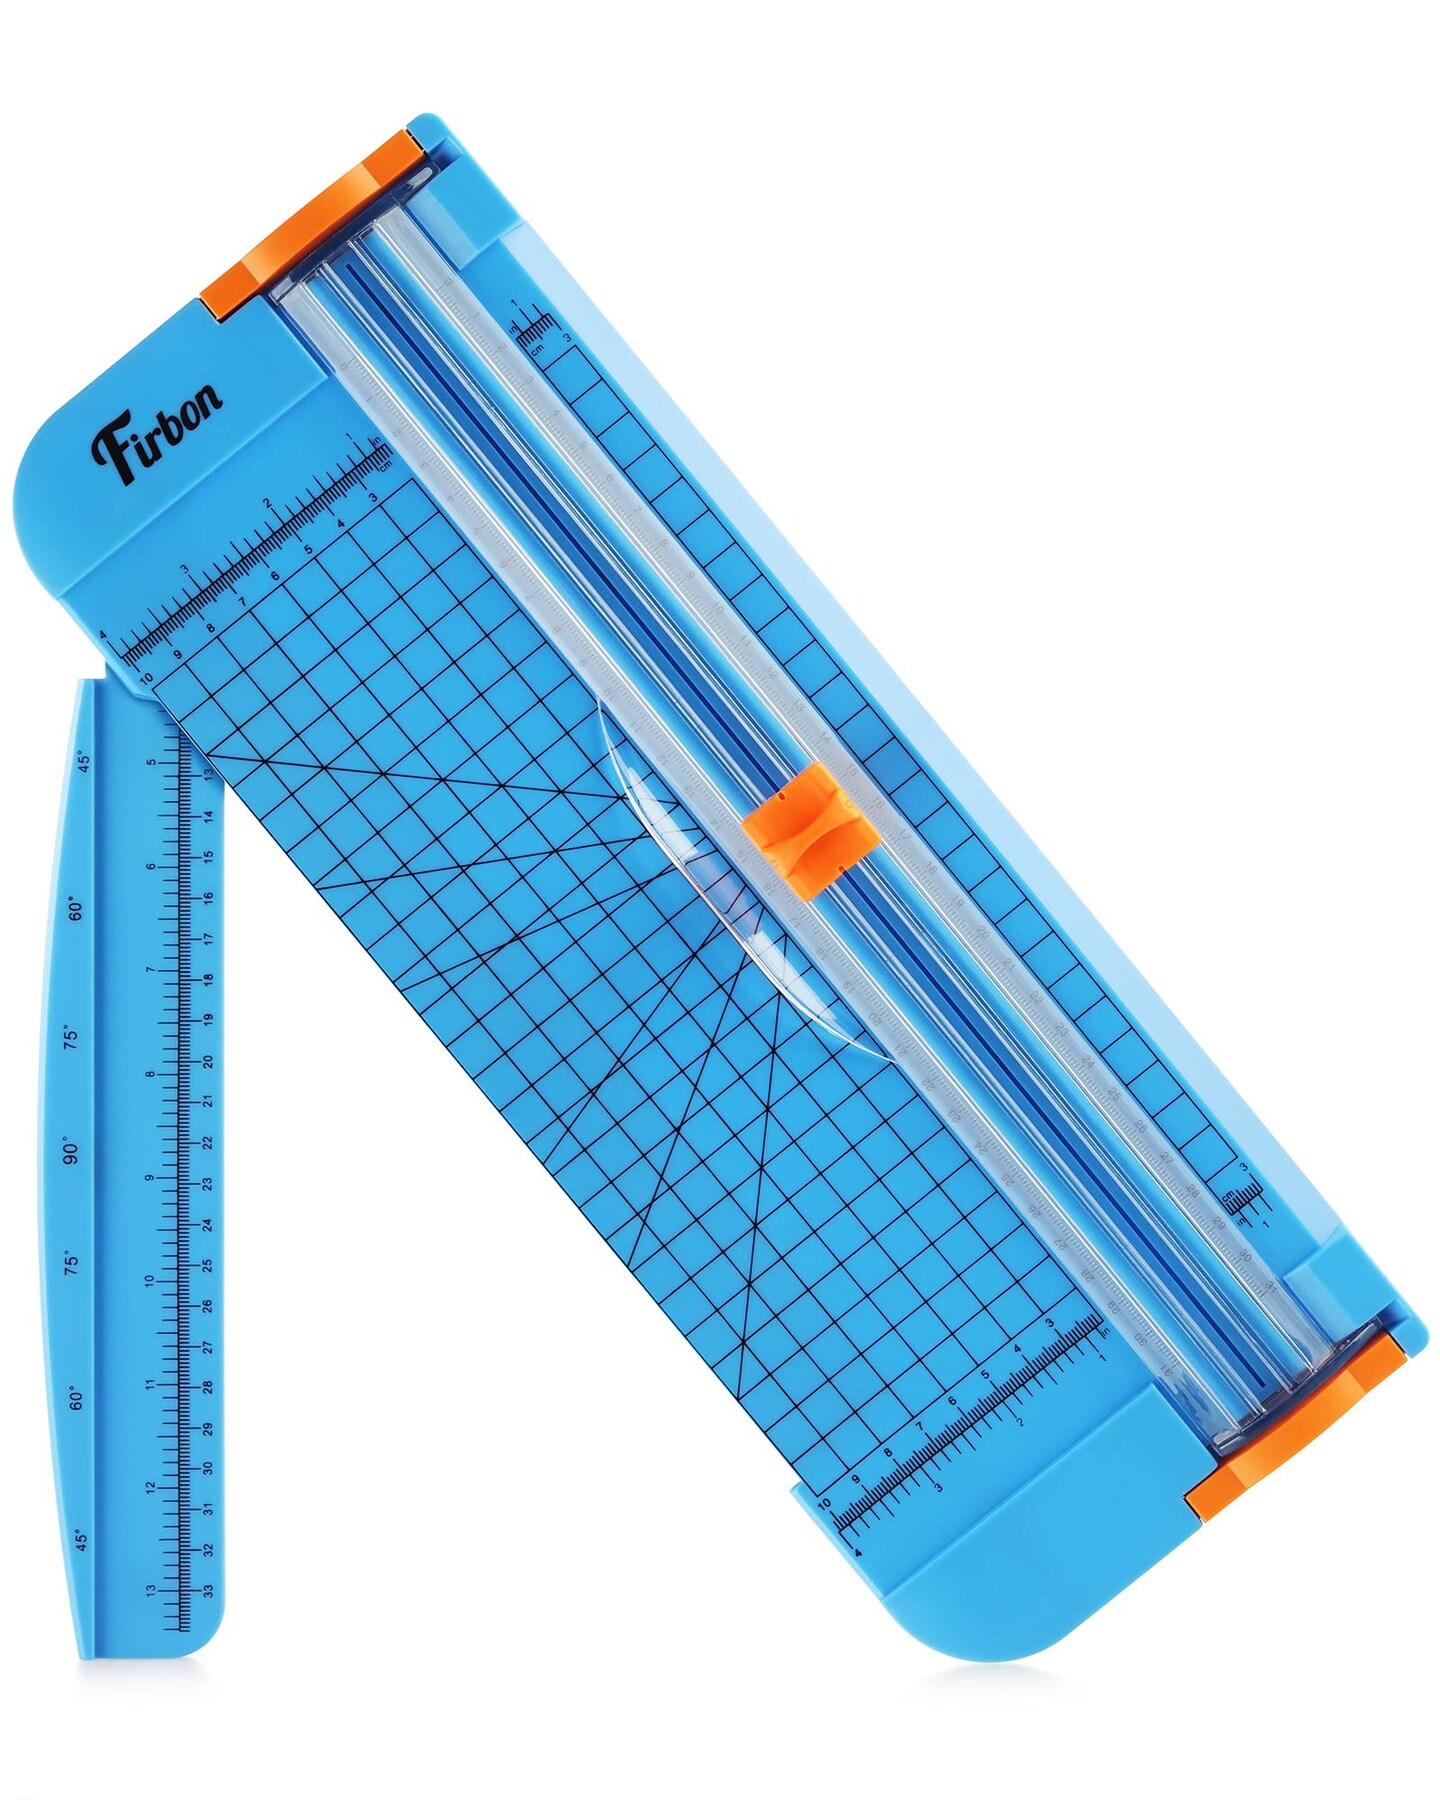 Firbon Blue A4 Paper Cutter, 12 Inch Titanium Straight Paper Trimmer with Side Ruler for Scrapbooking Craft, Paper, Coupon, Label, Cardstock